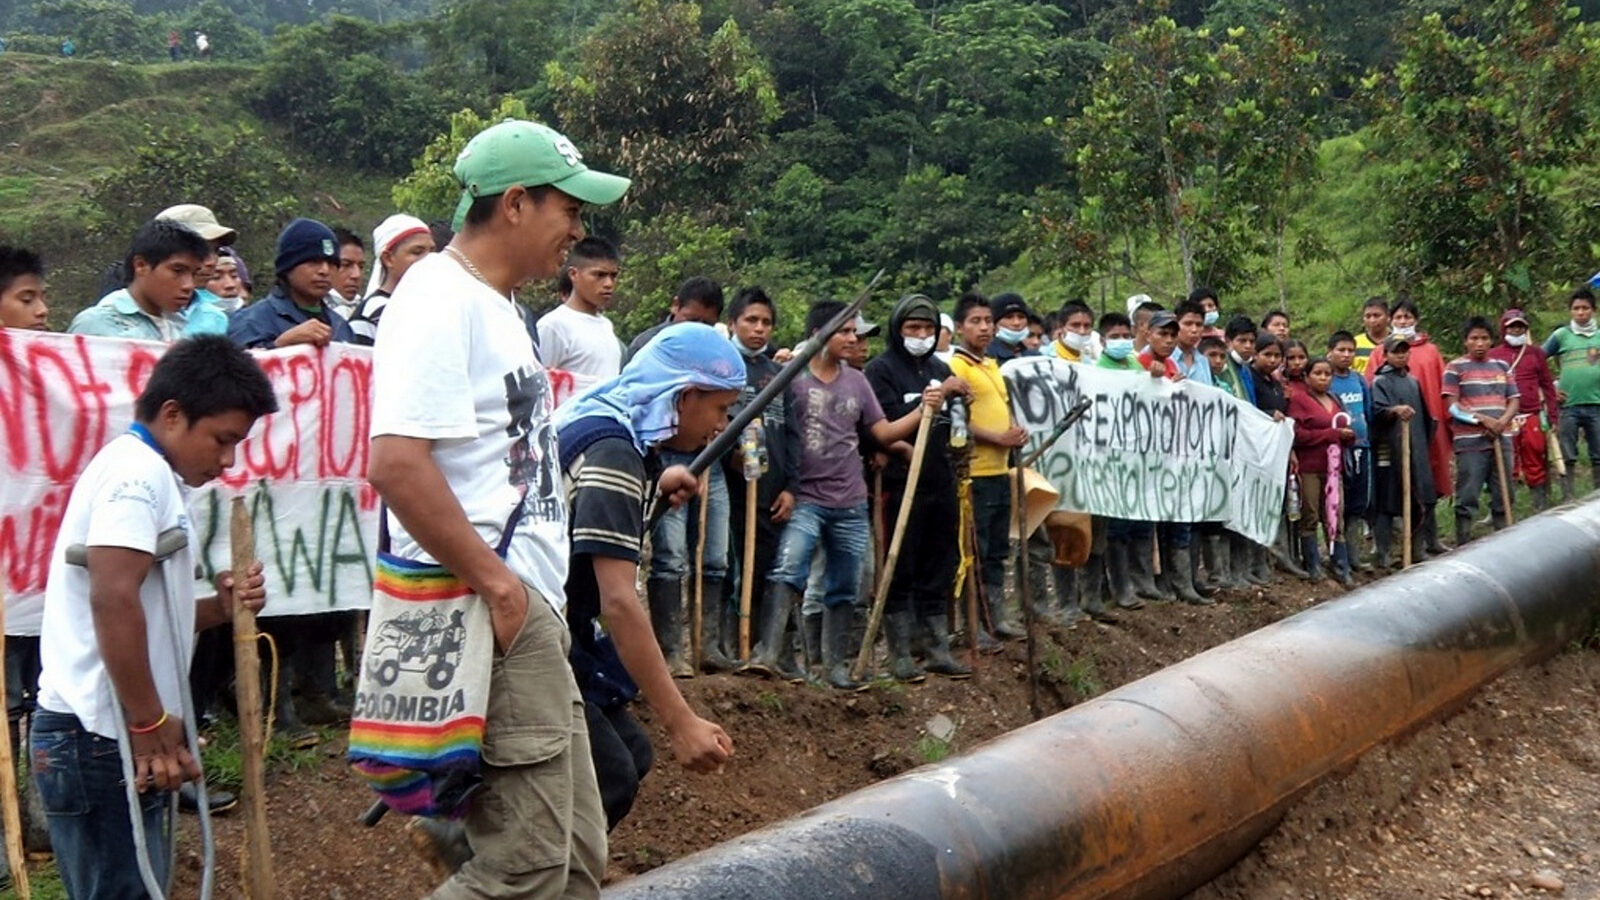 U'was along the Caño Limon-Covenas oil pipeline running through their ancestral territory. Photograph: Asou'wa